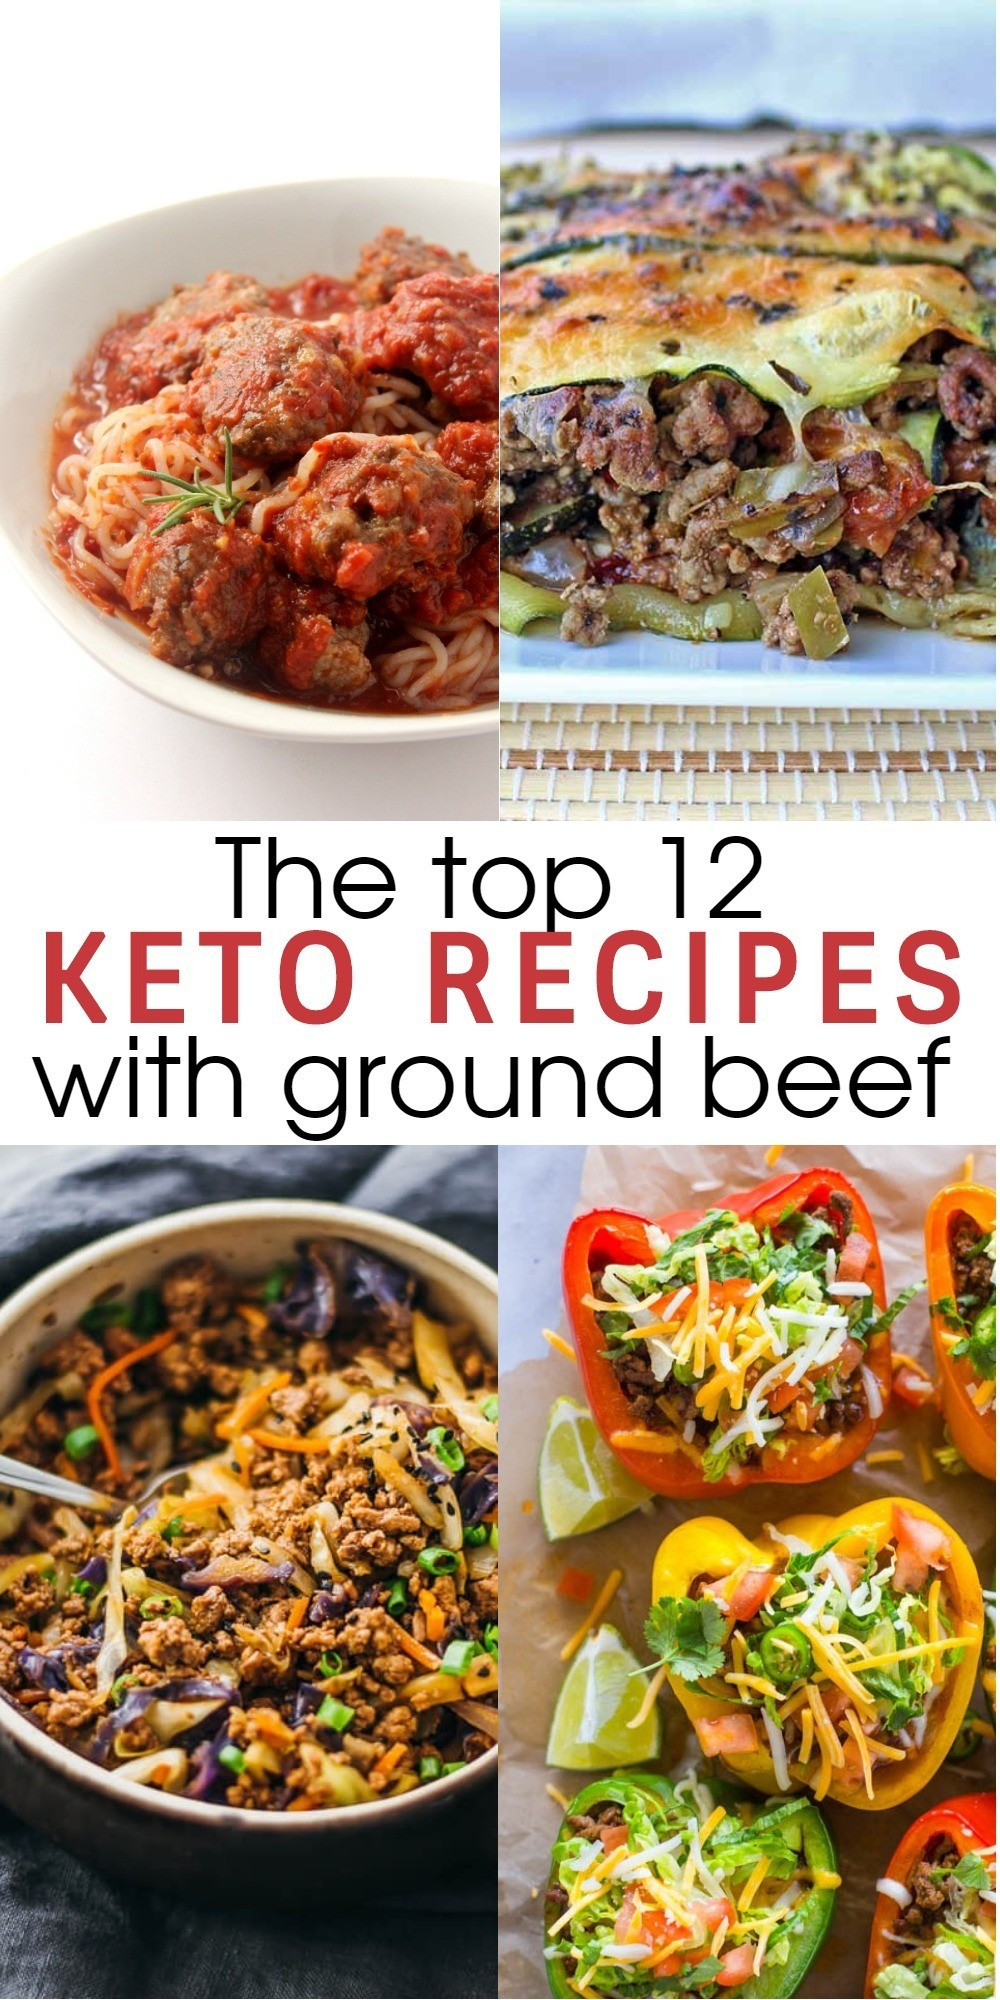 Healthy Keto Dinner Recipes Beef
 12 Flavorful and Easy Keto Recipes With Ground Beef To Try